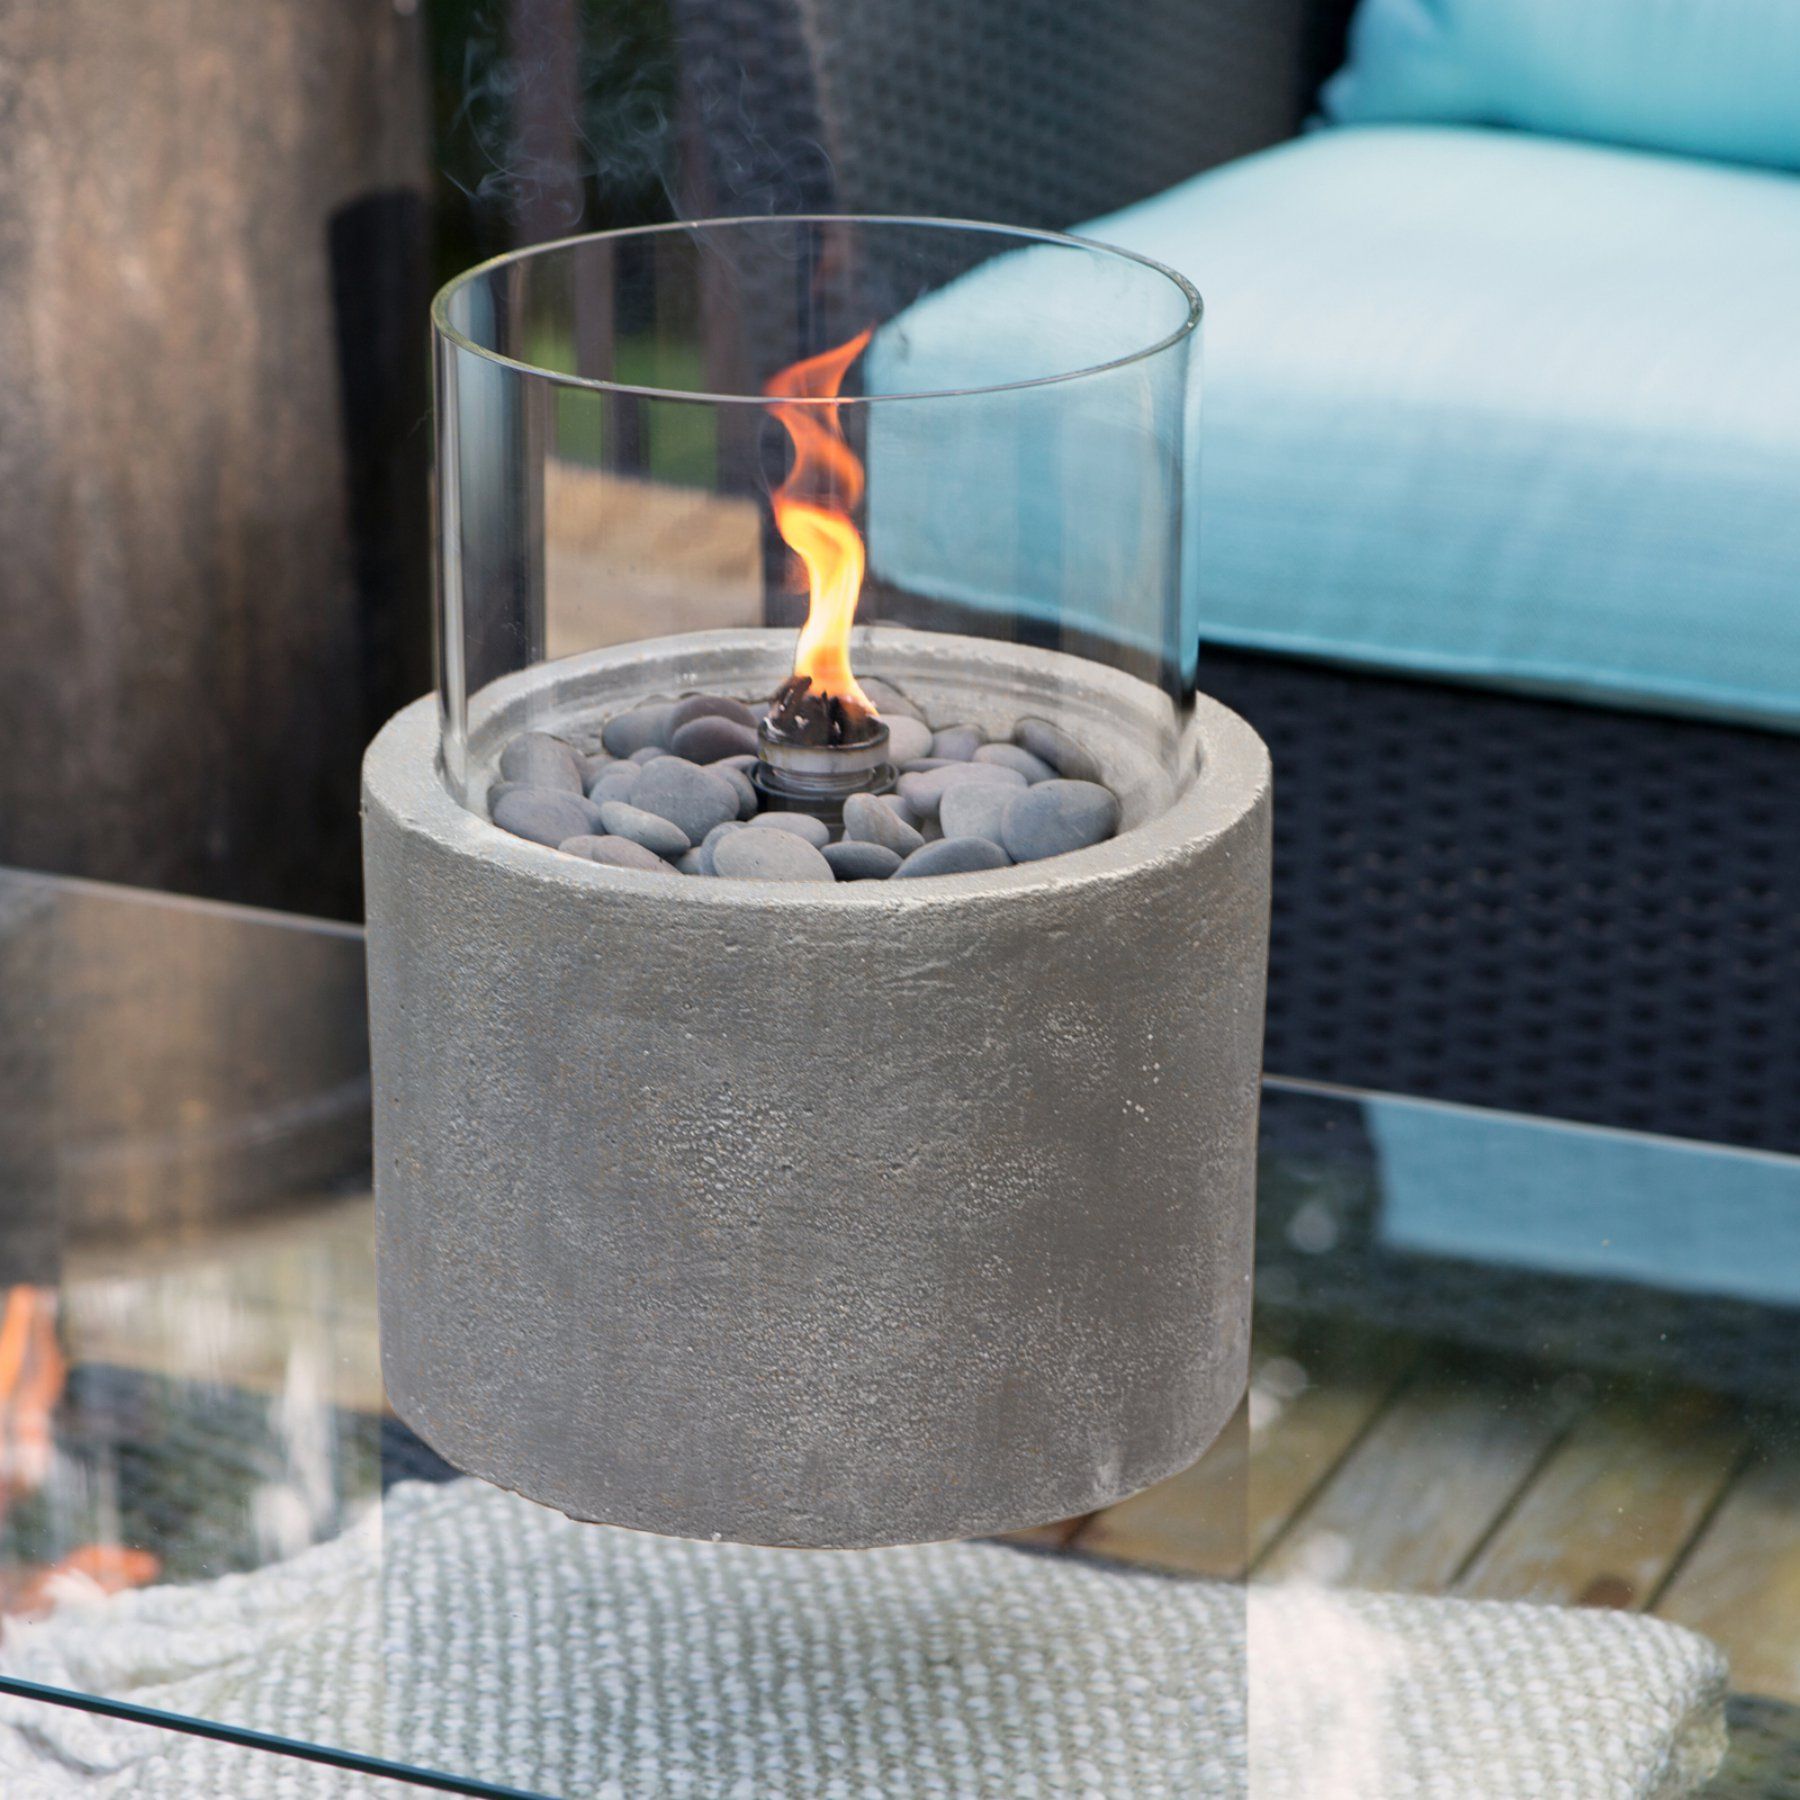 Wayfair Outdoor Fireplace New Coral Coast Kona Tabletop Firebowl Products In 2019